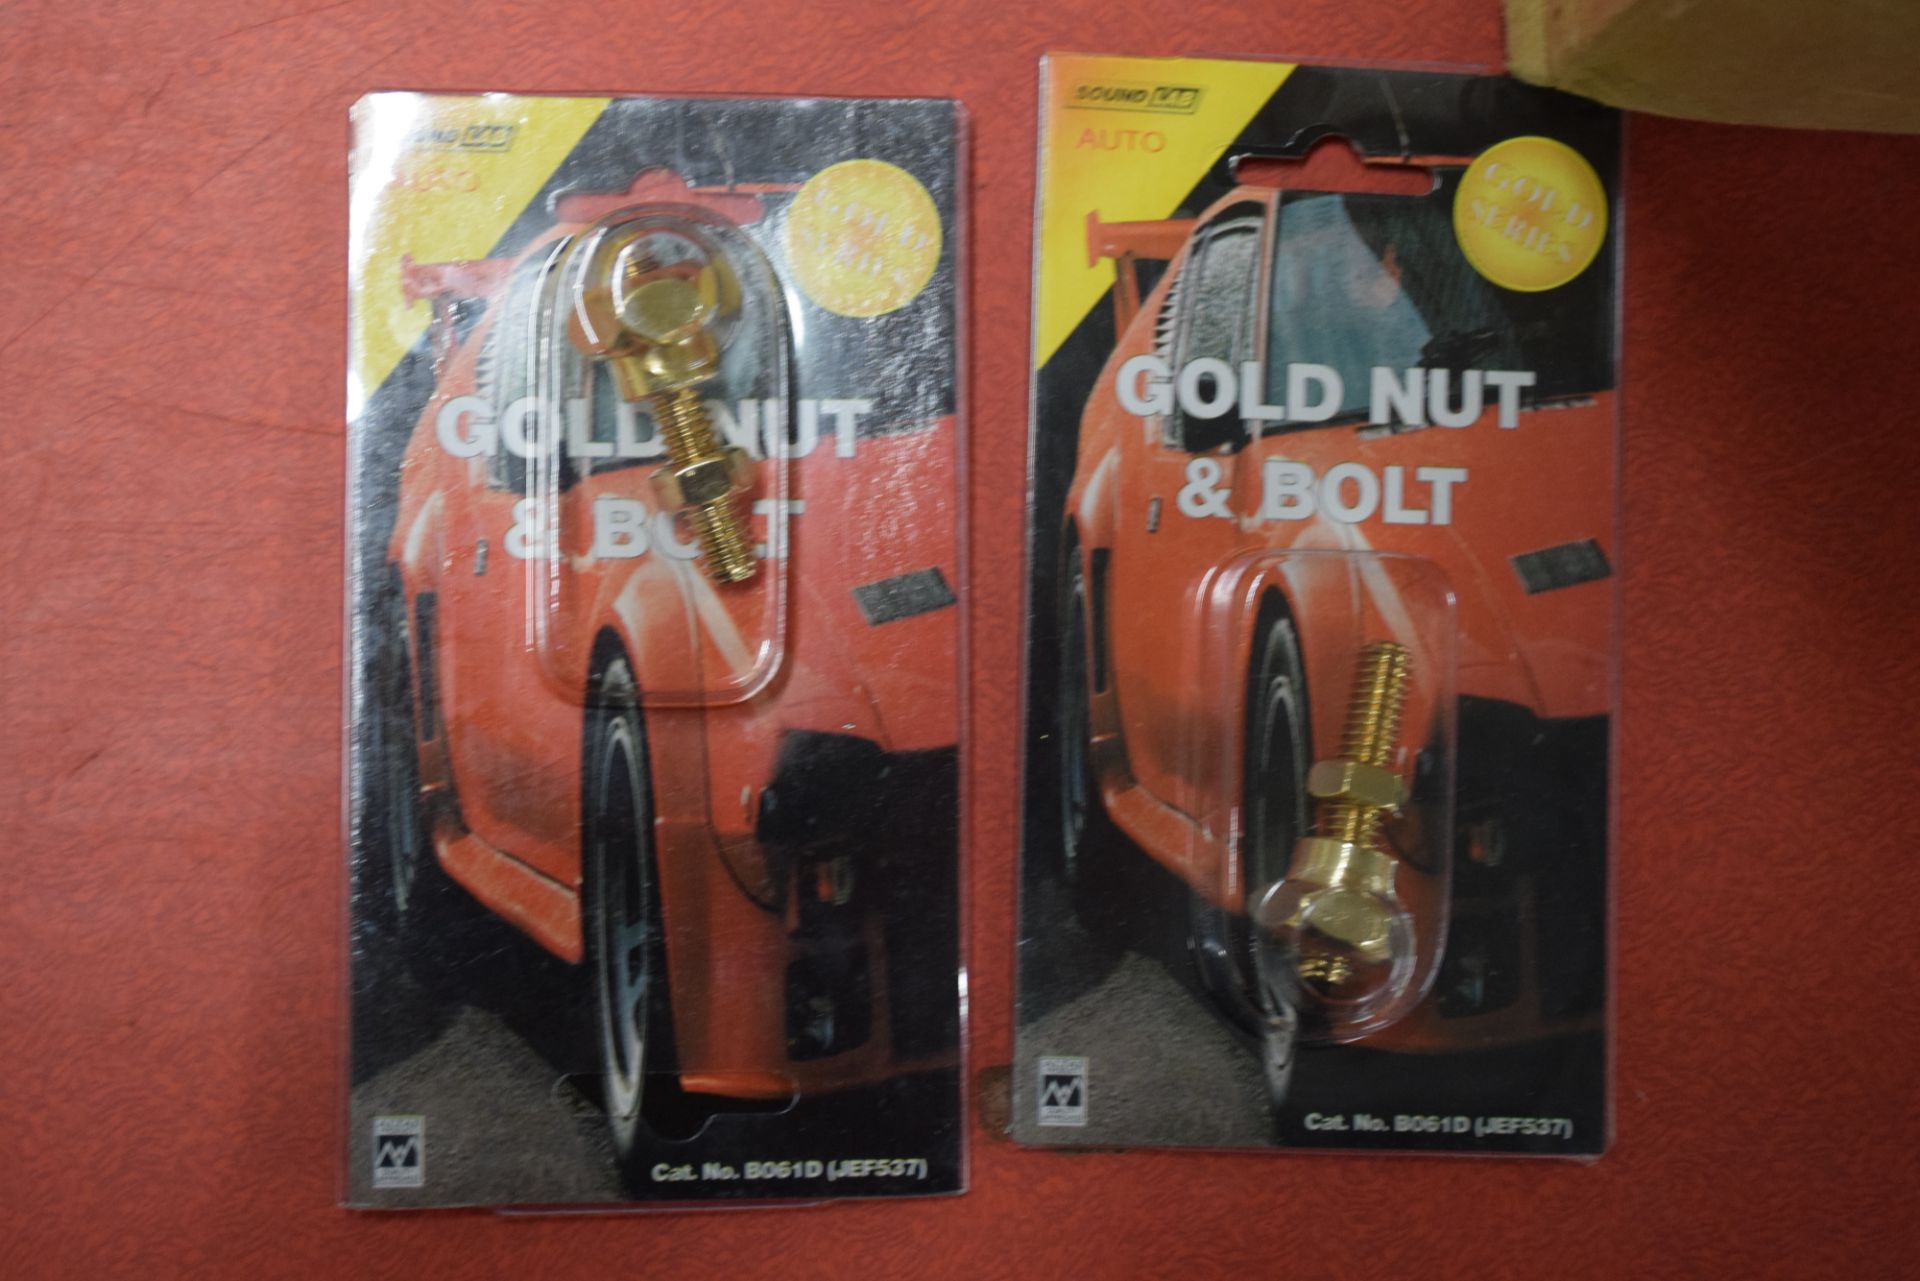 TWO BOXES CONTAINING SOUND LAB AUTO GOLD NUT AND BOLT CONNECTORS, APPROX 20 PIECES PER BOX